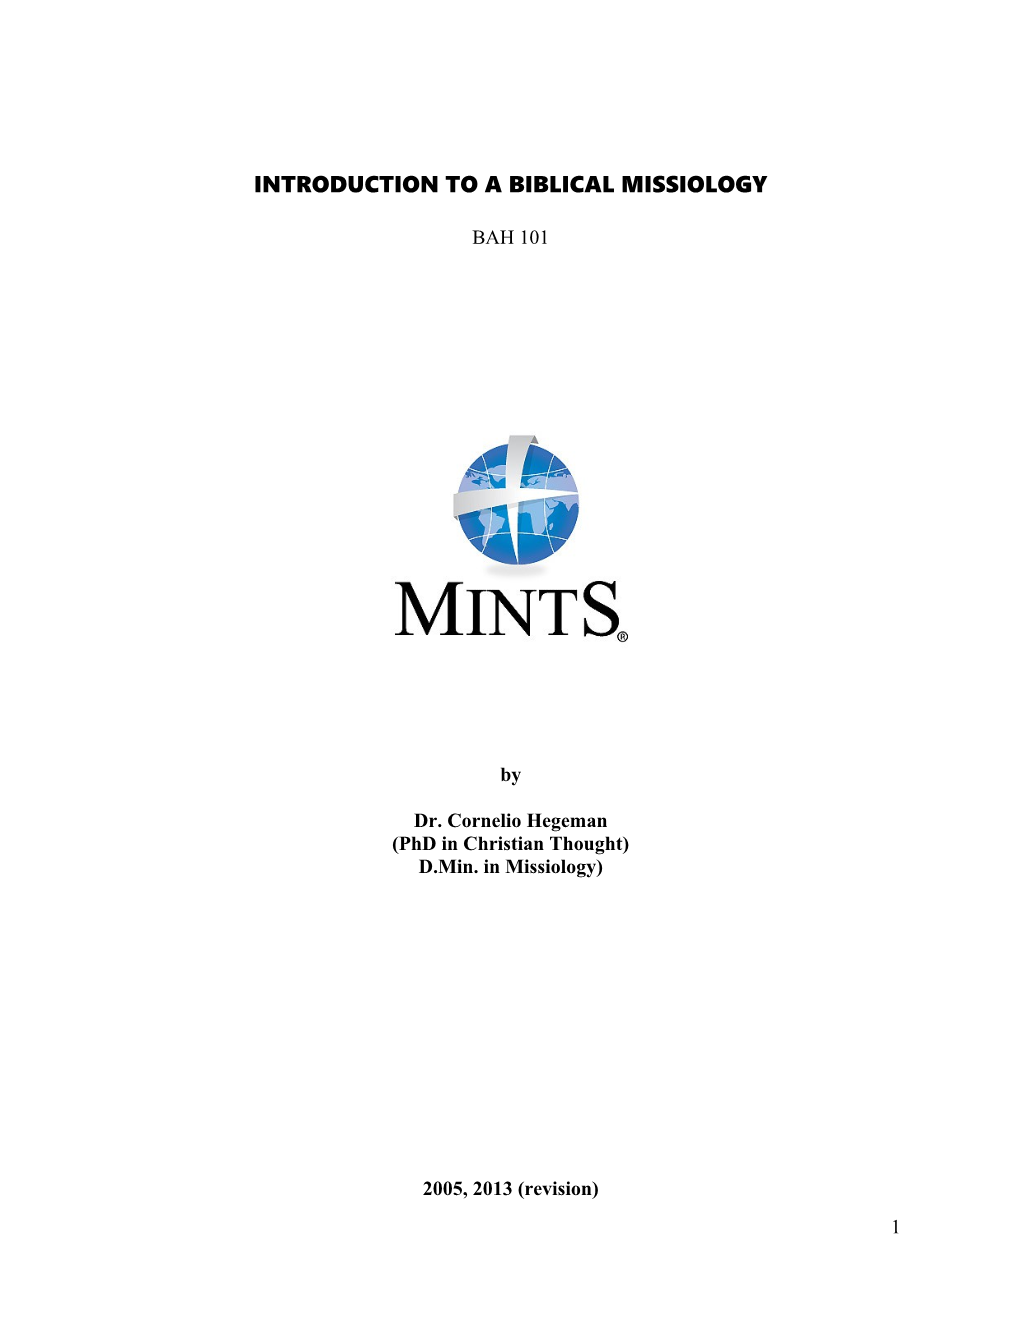 Introduction to a Biblical Missiology